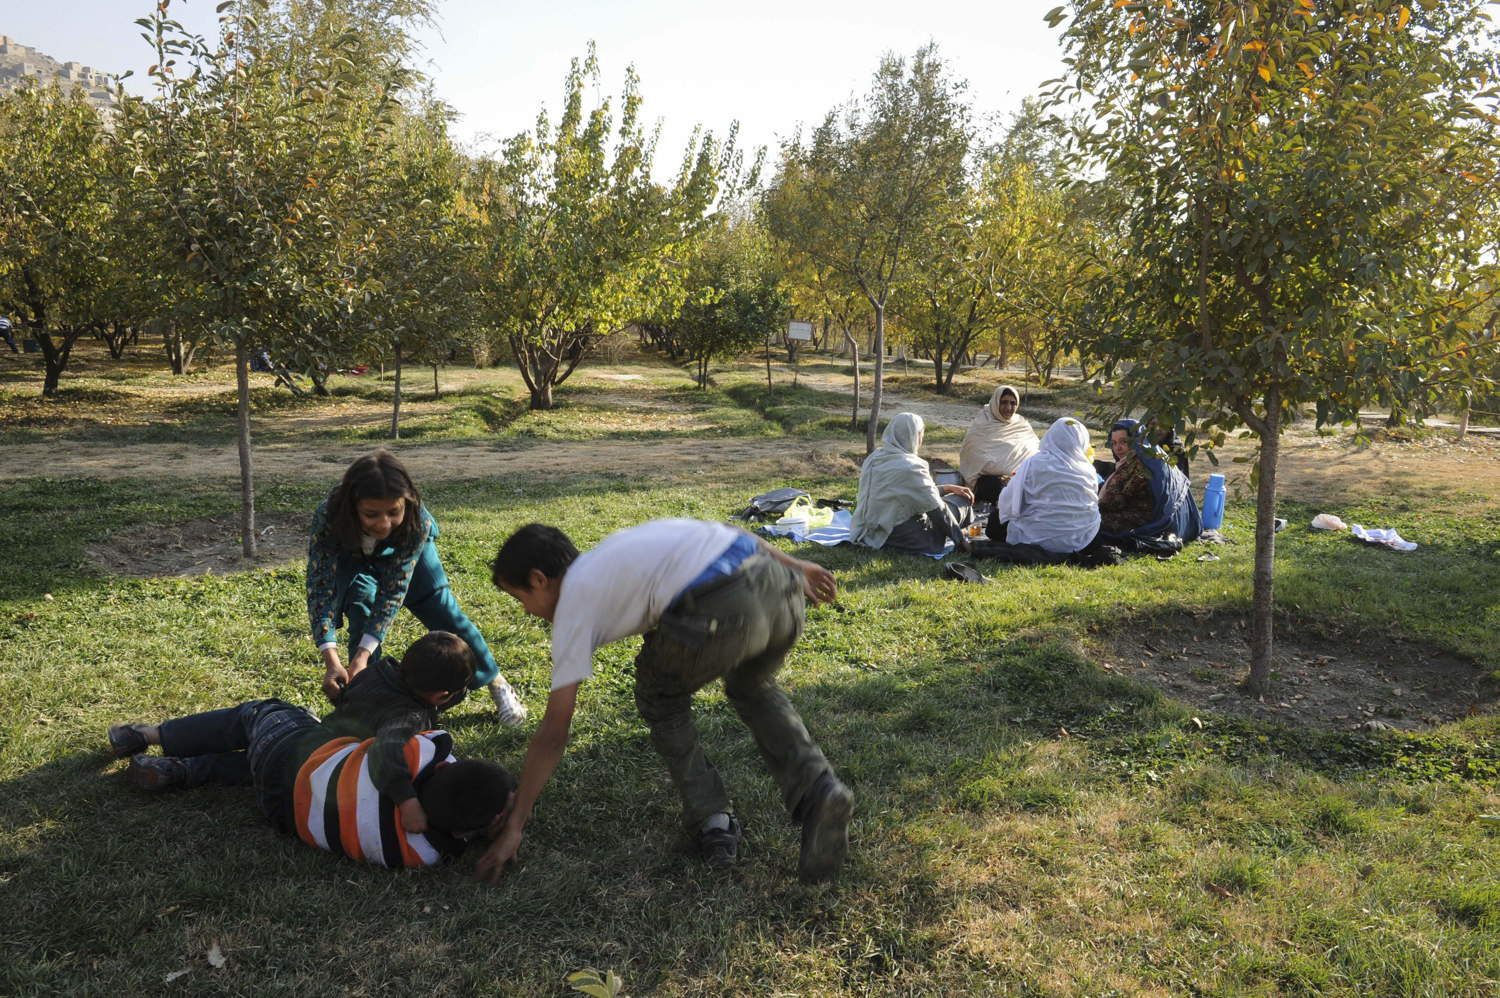  Children play on the grass at Bagh-e Babur historic park in Kabul Afghanistan while mothers watch nearby. The park is also the last resting-place of the first Mughal emperor Babur.  